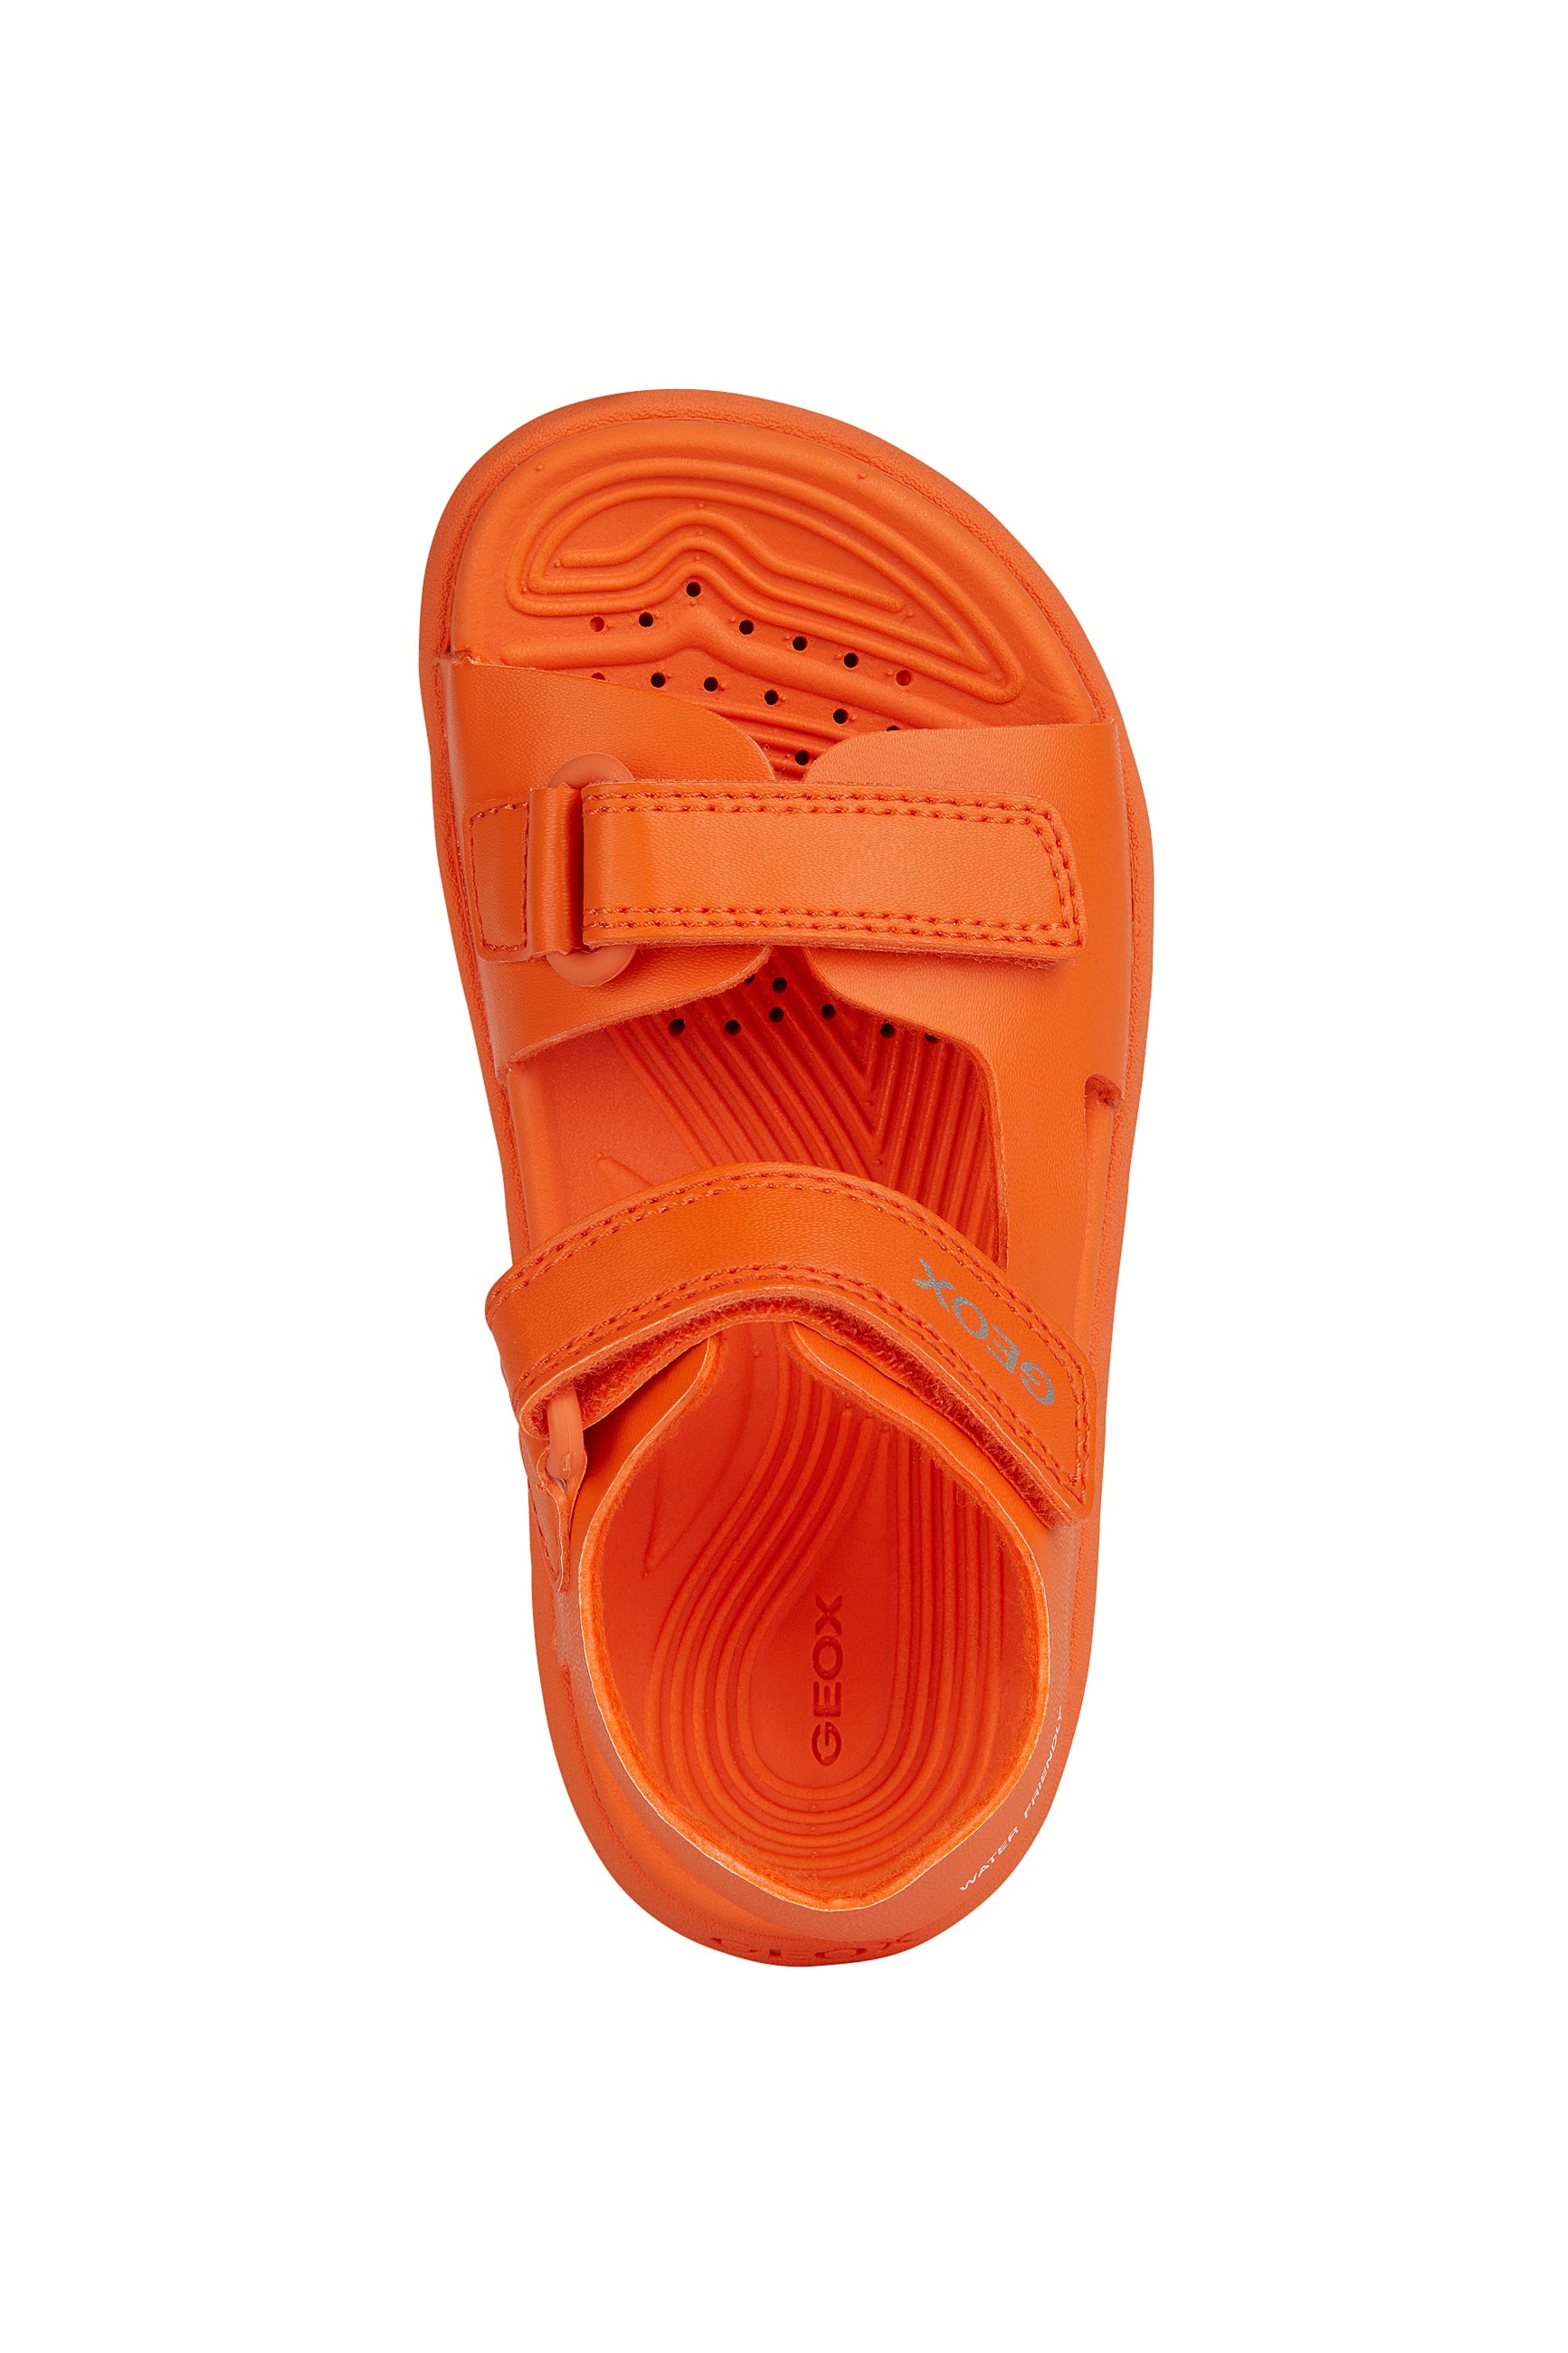 A unisex open toe synthetic water friendly sandal by Geox. Style Fusbetto in orange with two velcro fastenings. Top view.